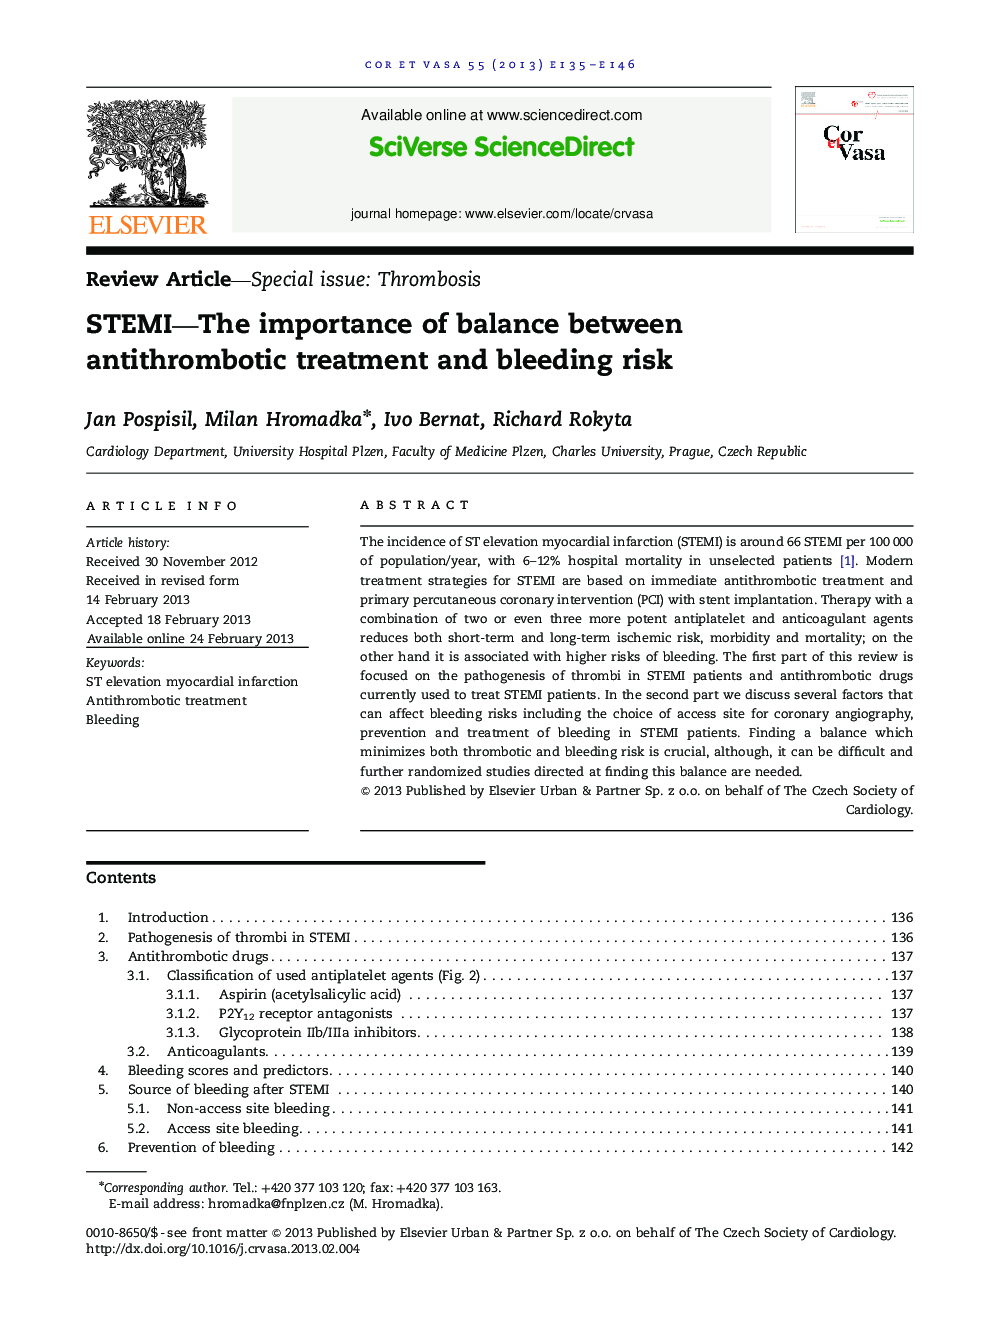 STEMI-The importance of balance between antithrombotic treatment and bleeding risk